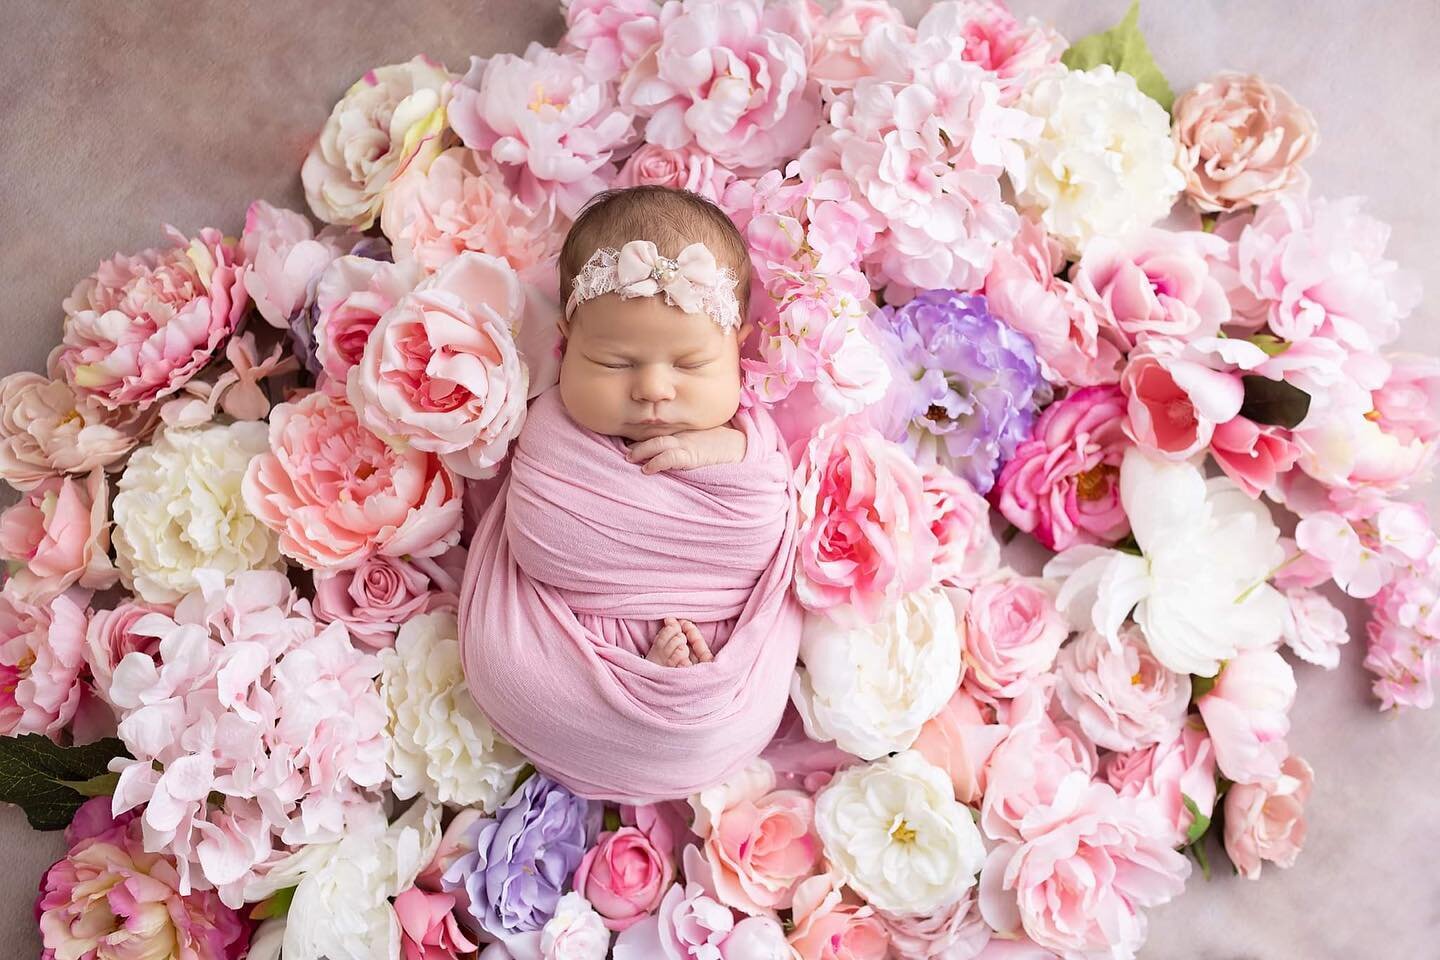 Oh my goodness, so many newborn girls in April!  Where are all the boys?? I love adding floral to my sessions. This little bundle slept so well for me. ❤️

#newbornphotography #newbornphotographer #newbornsession #sandiego #sandiegomom #carlsbad #oce